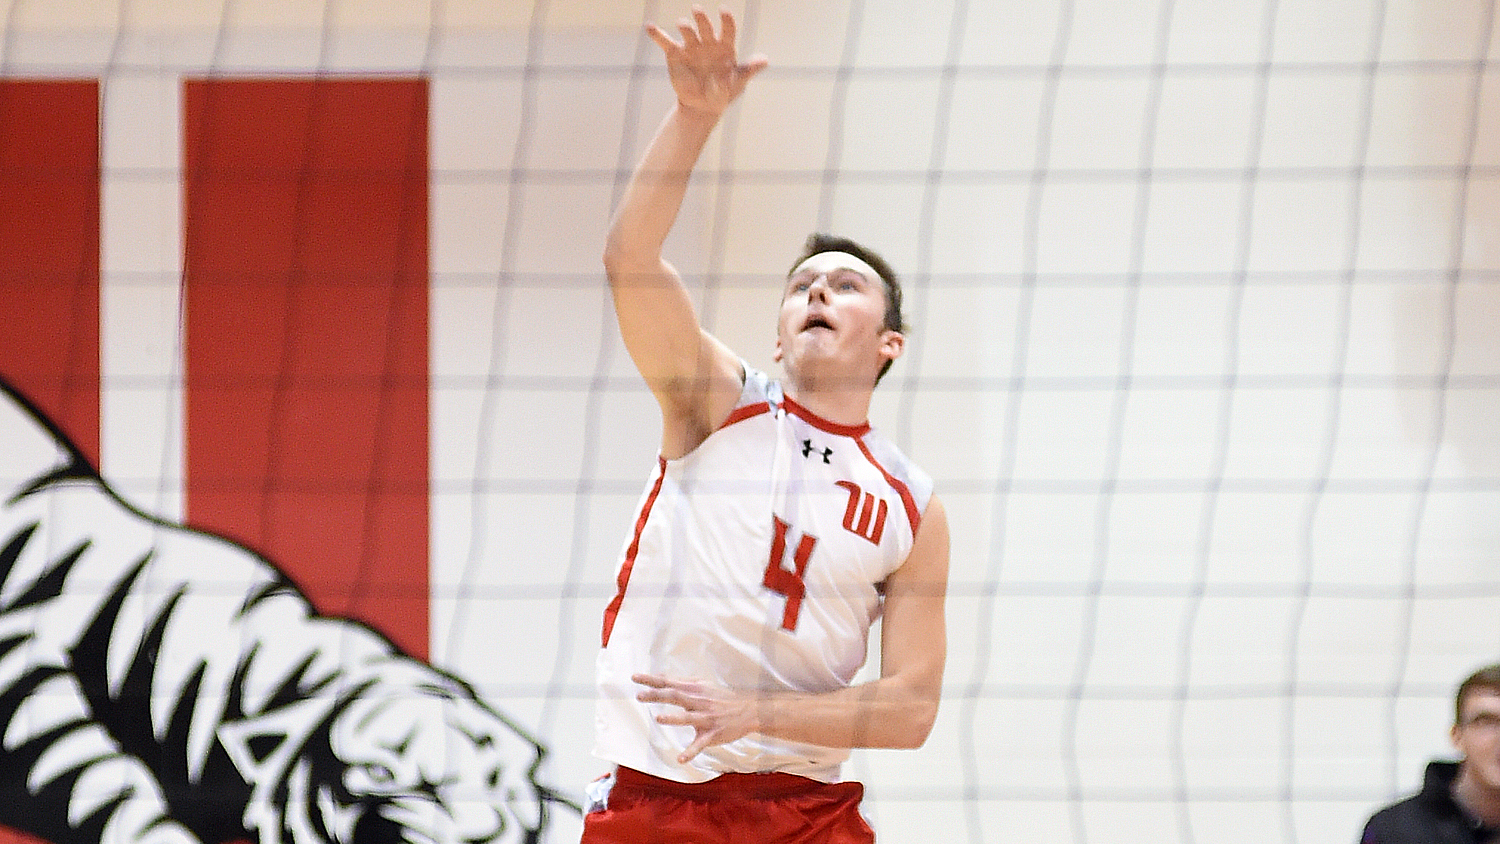 Wittenberg Suffers First Loss of Season in MCVL Opener